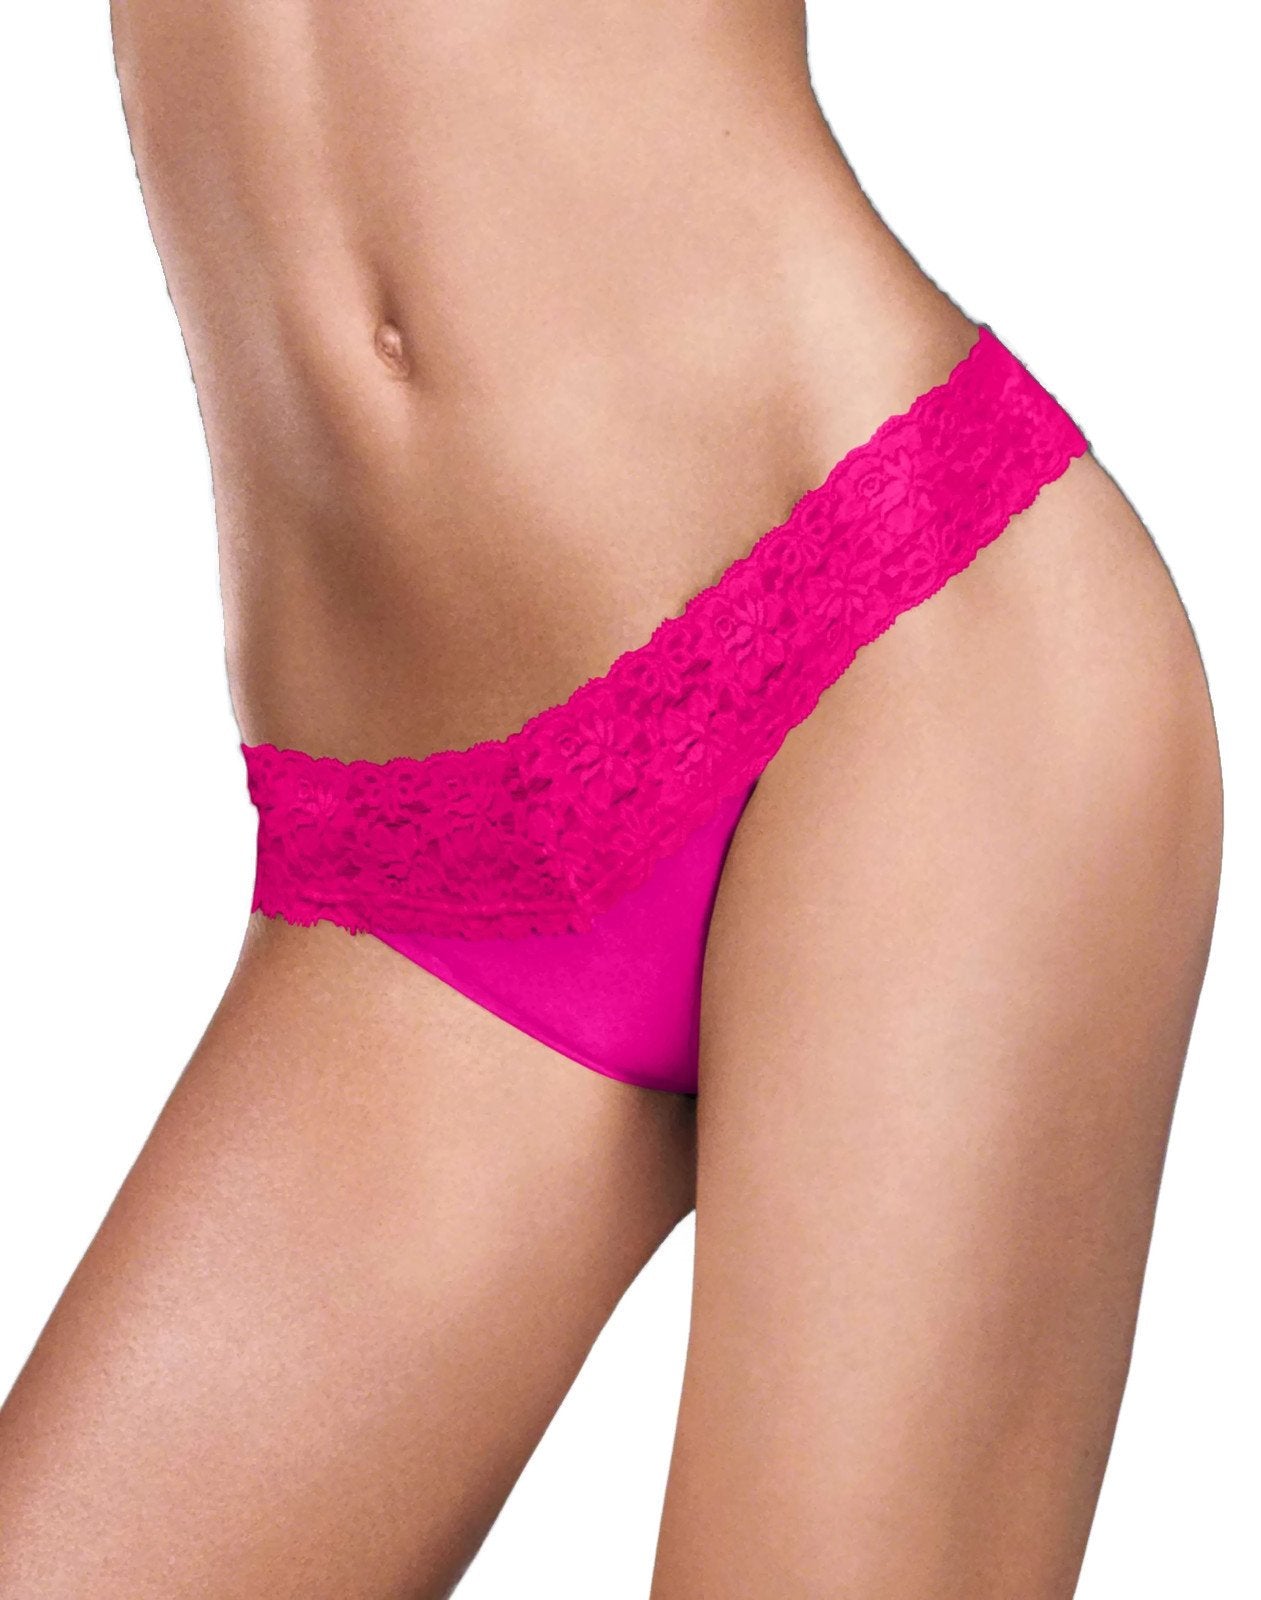 Maidenform Dream Lace Thong, S/M, Wild Strawberryâ€ – The Charming